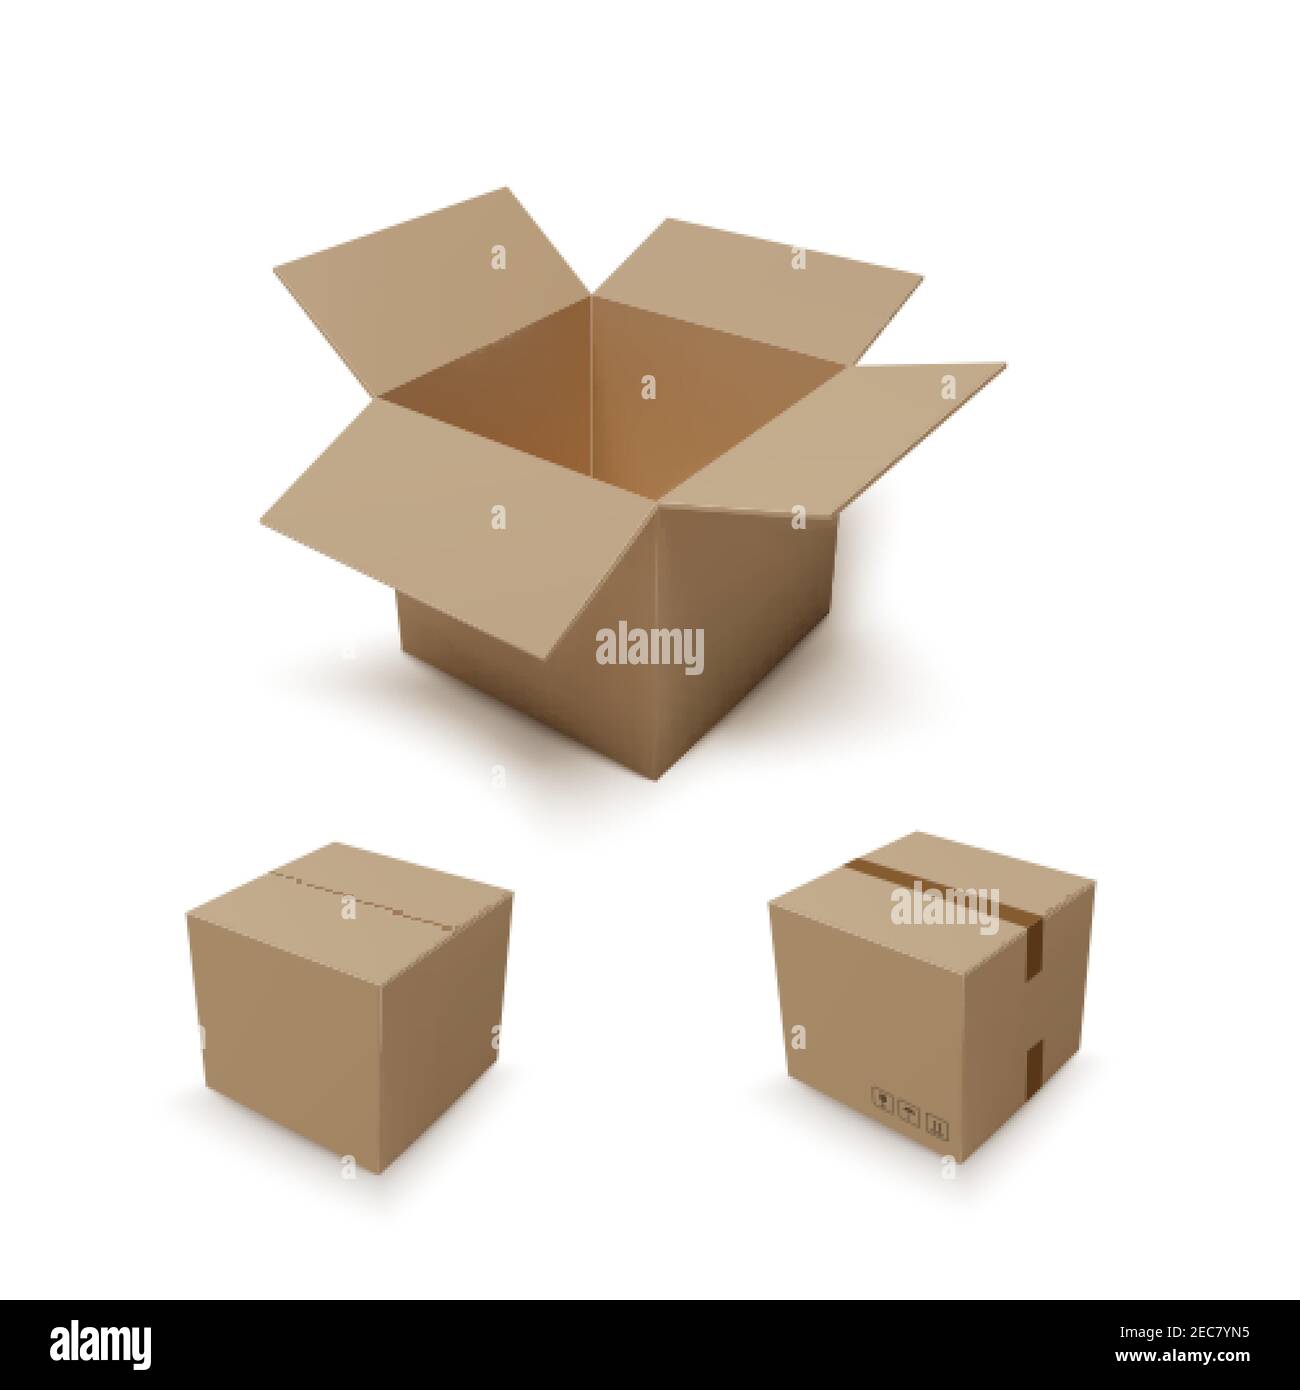 open and closed box